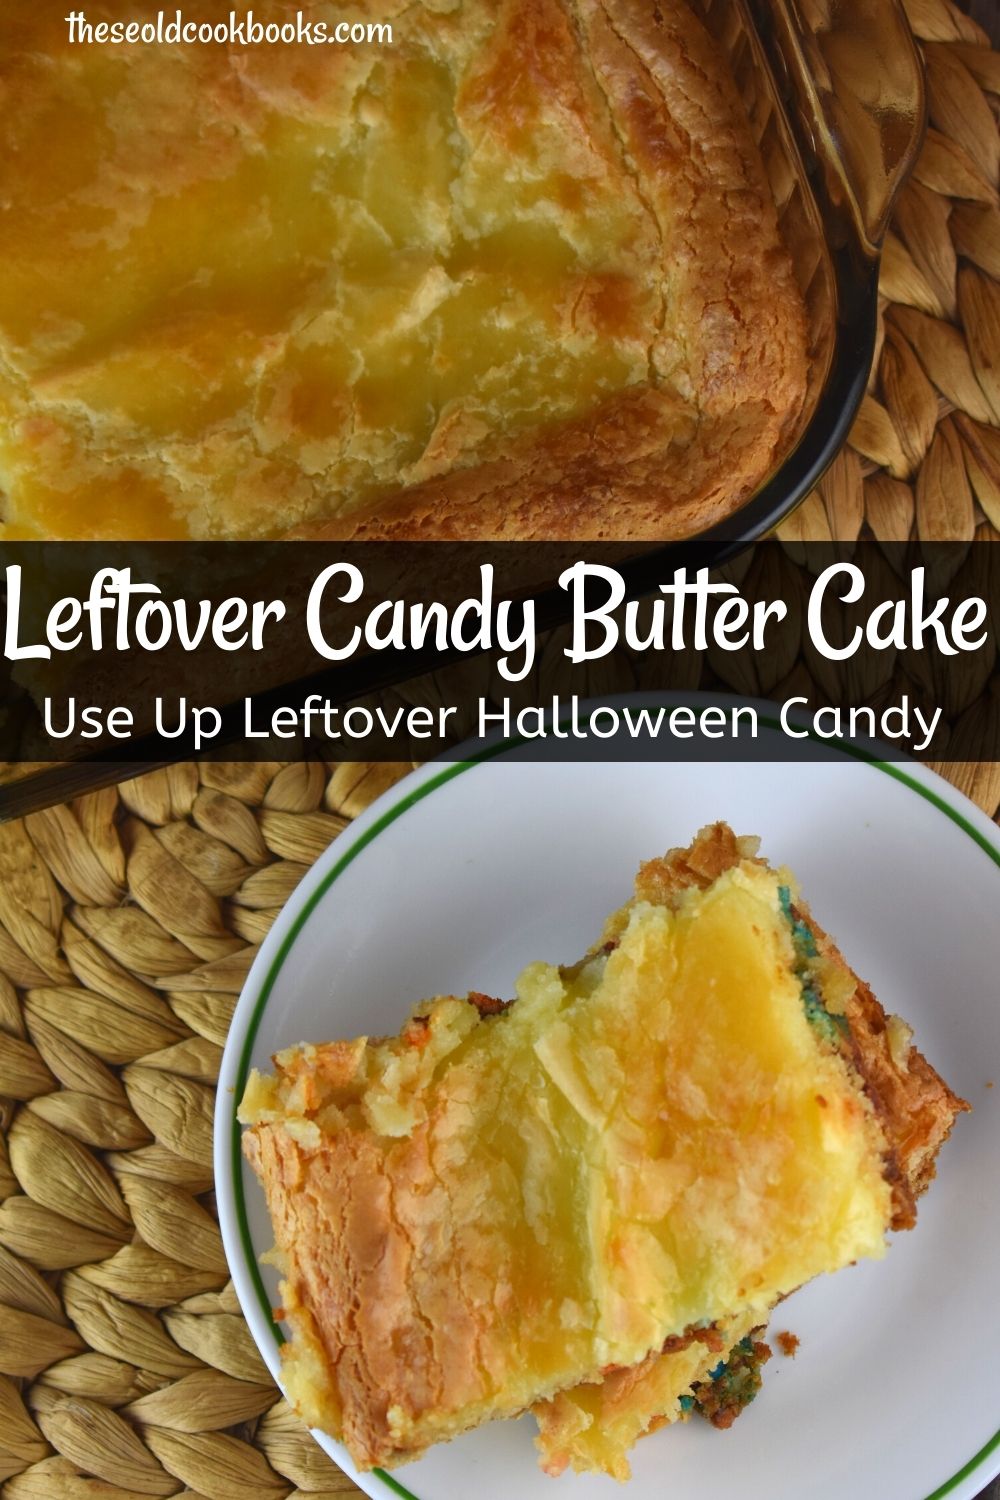 Leftover Candy Ooey Gooey Cake is the perfect way to use up leftover Halloween candy.  Using a boxed cake mix, this candy dessert couldn't get much easier. 